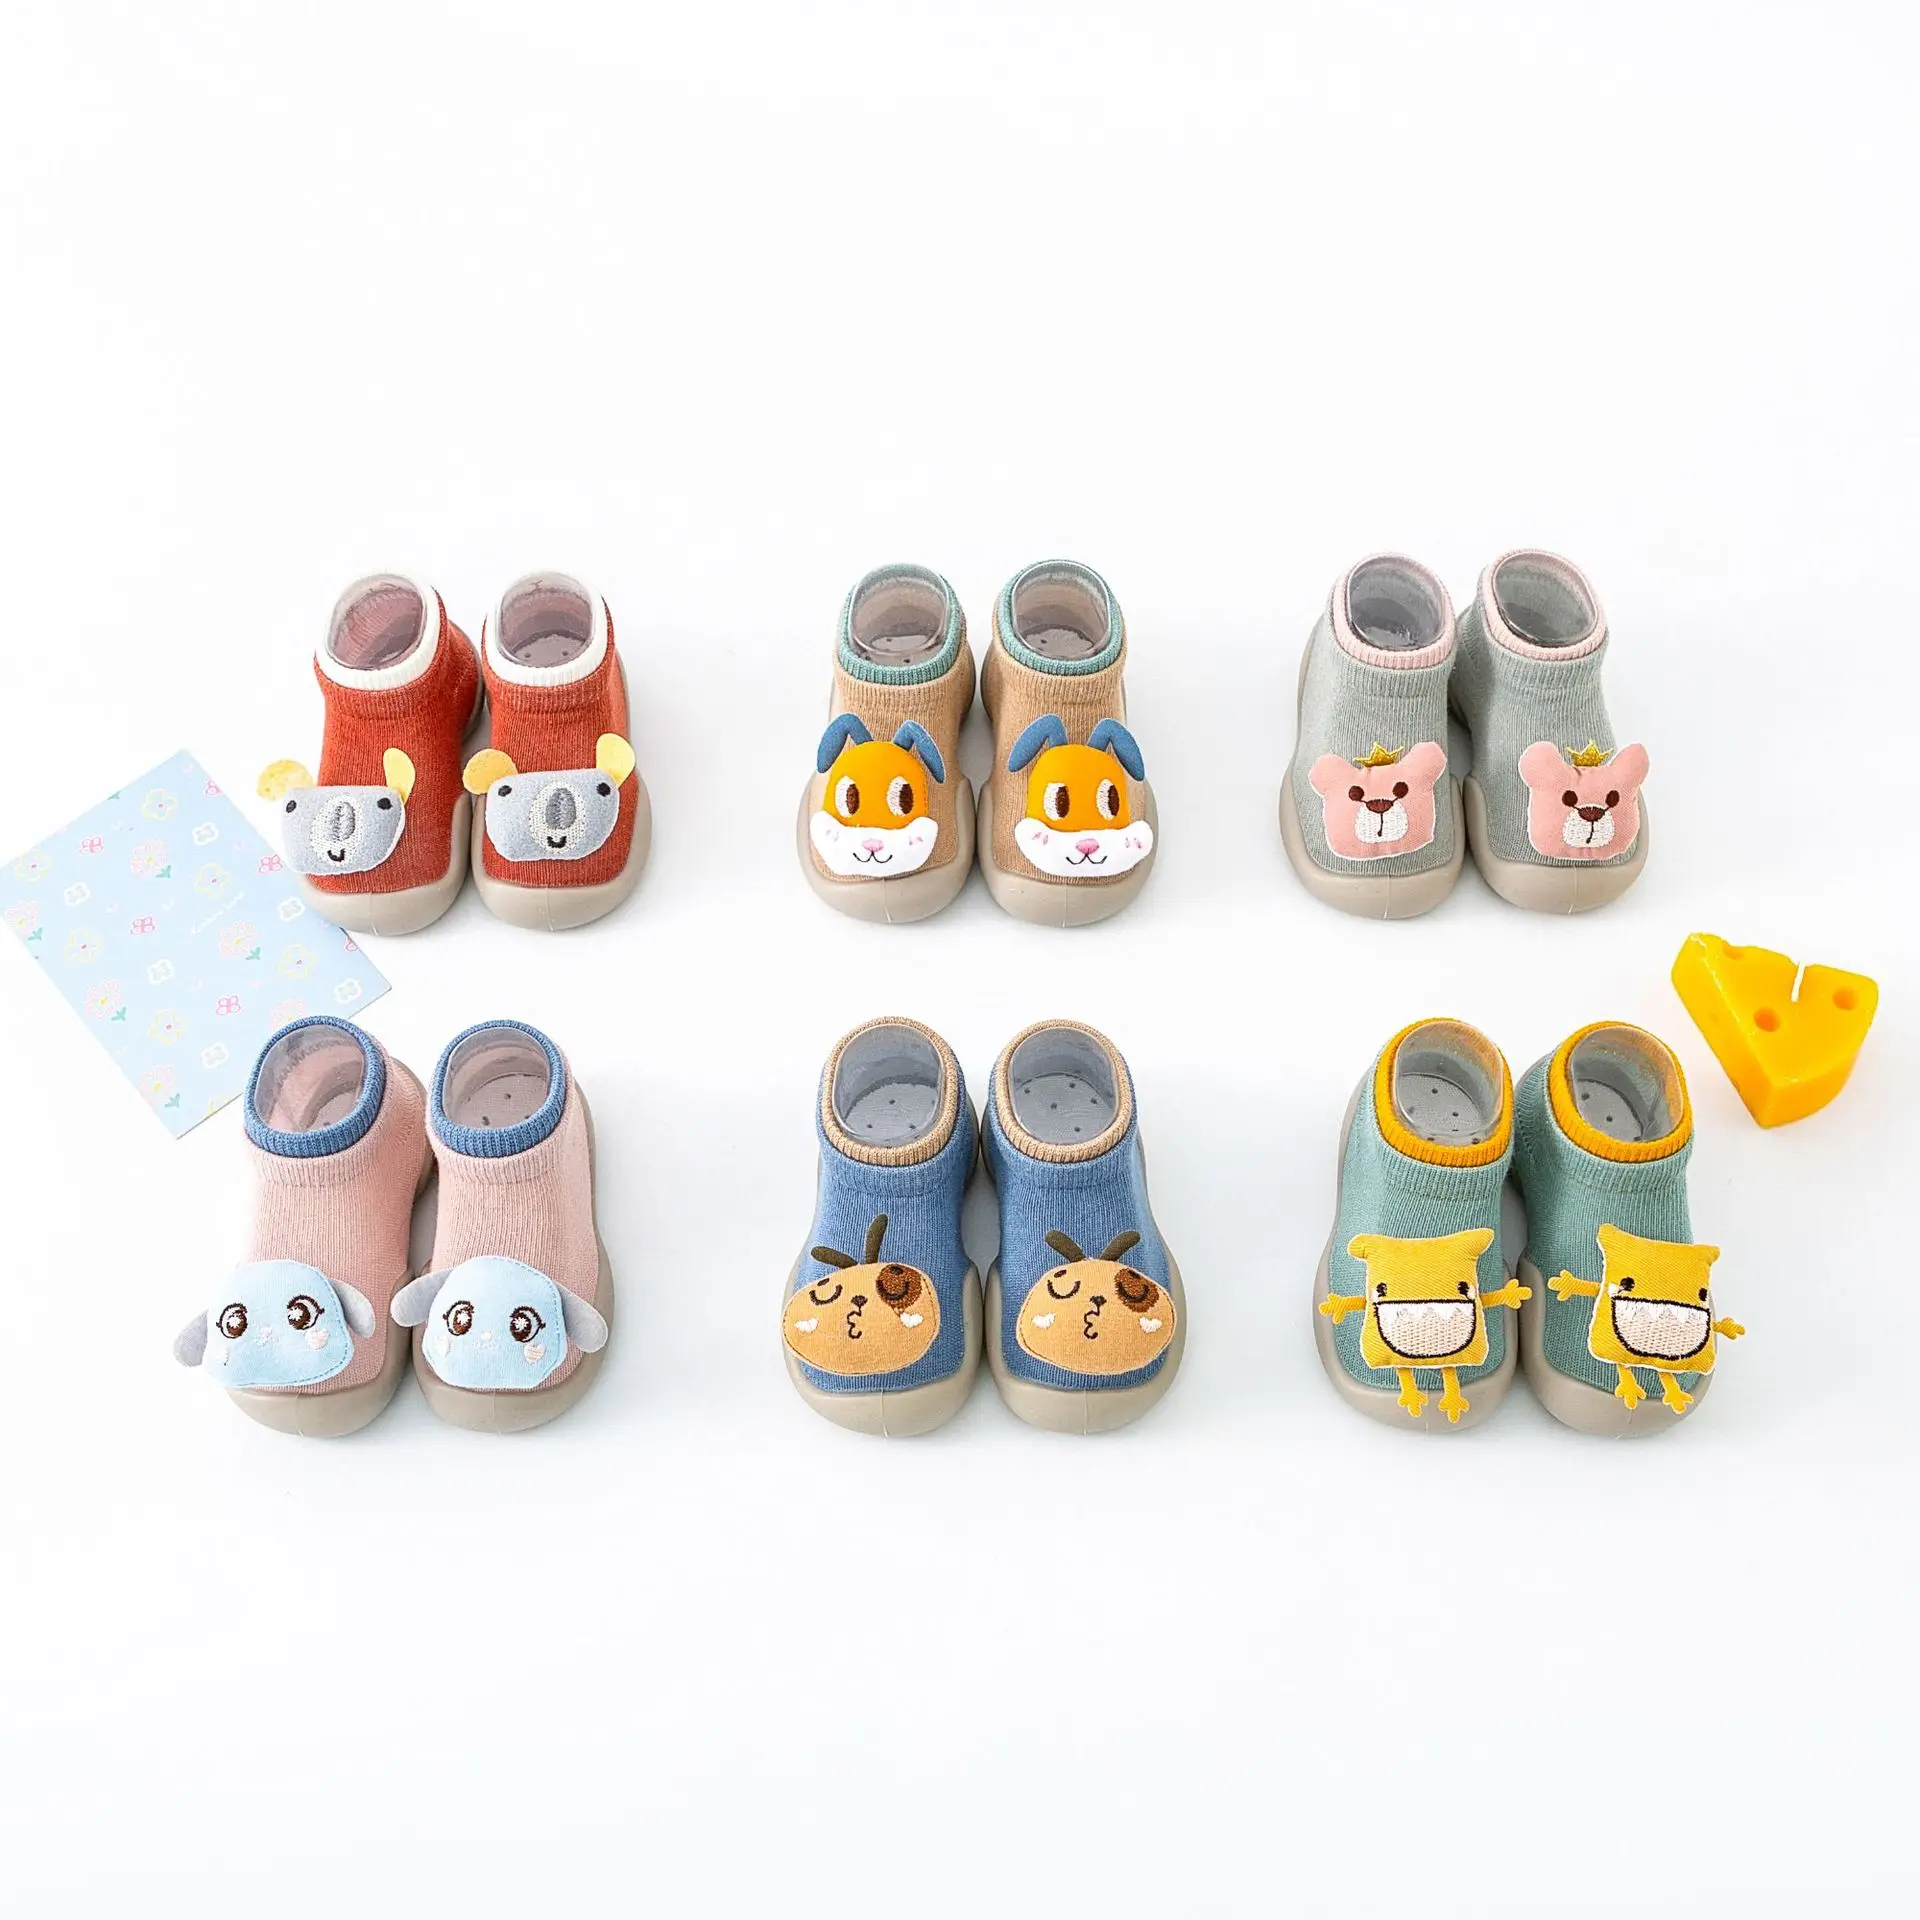 

Baby Rubber Sock Shoes Infant Cute Kids Boys Girls Cartoon Animal Soft Soled Child Floor Sneaker Toddler First Walkers Non-Slip